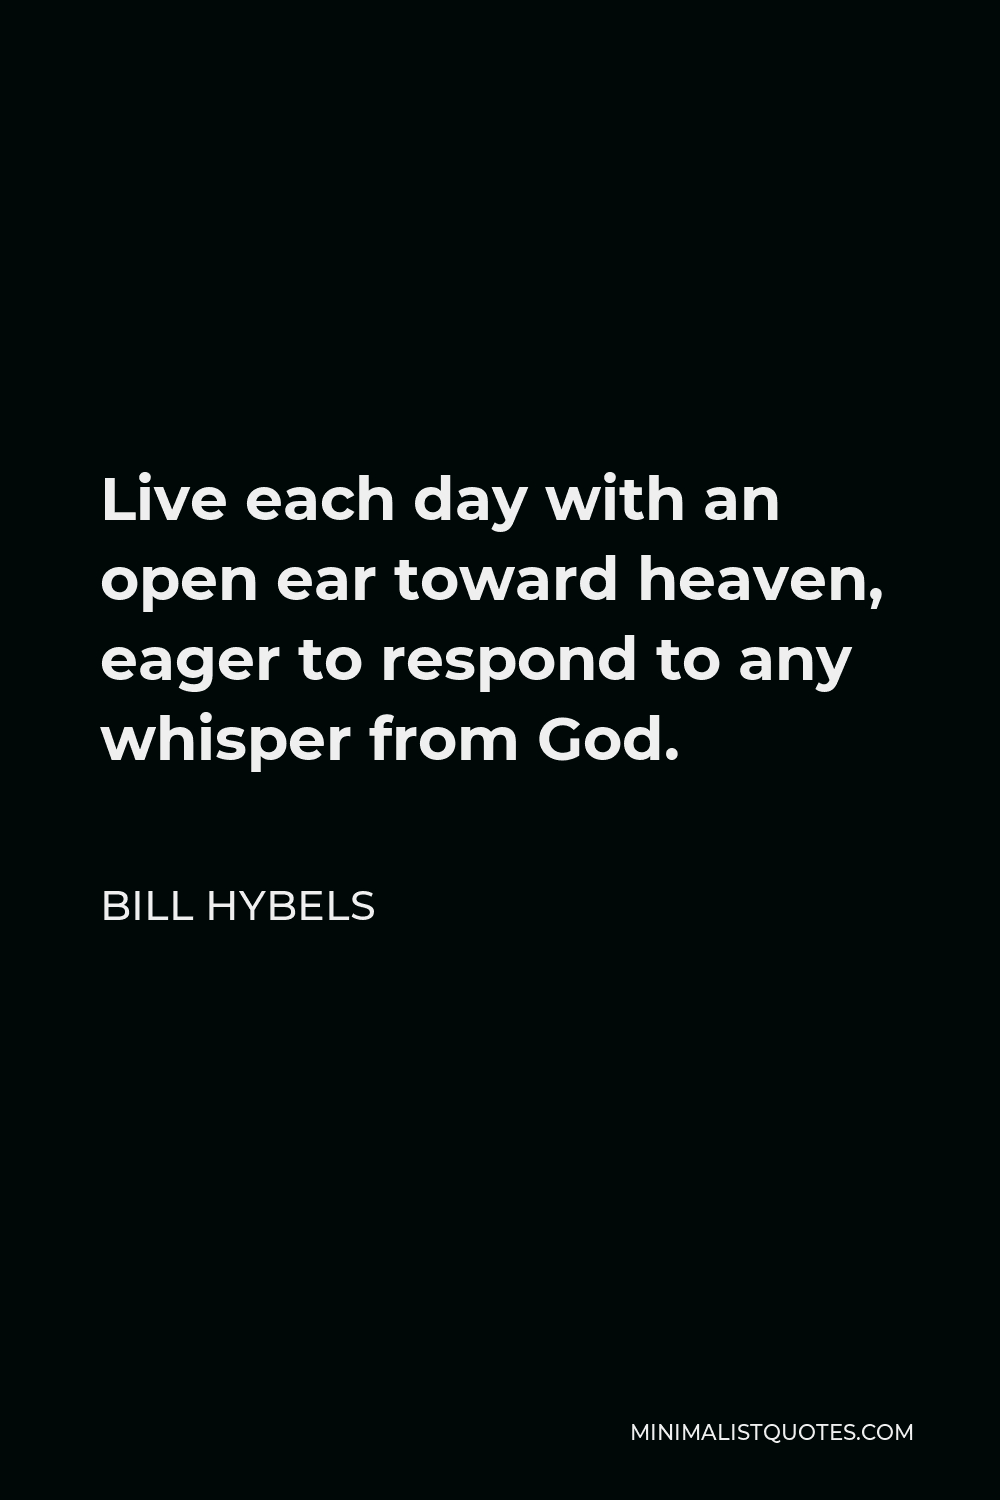 Bill Hybels Quote - Live each day with an open ear toward heaven, eager to respond to any whisper from God.